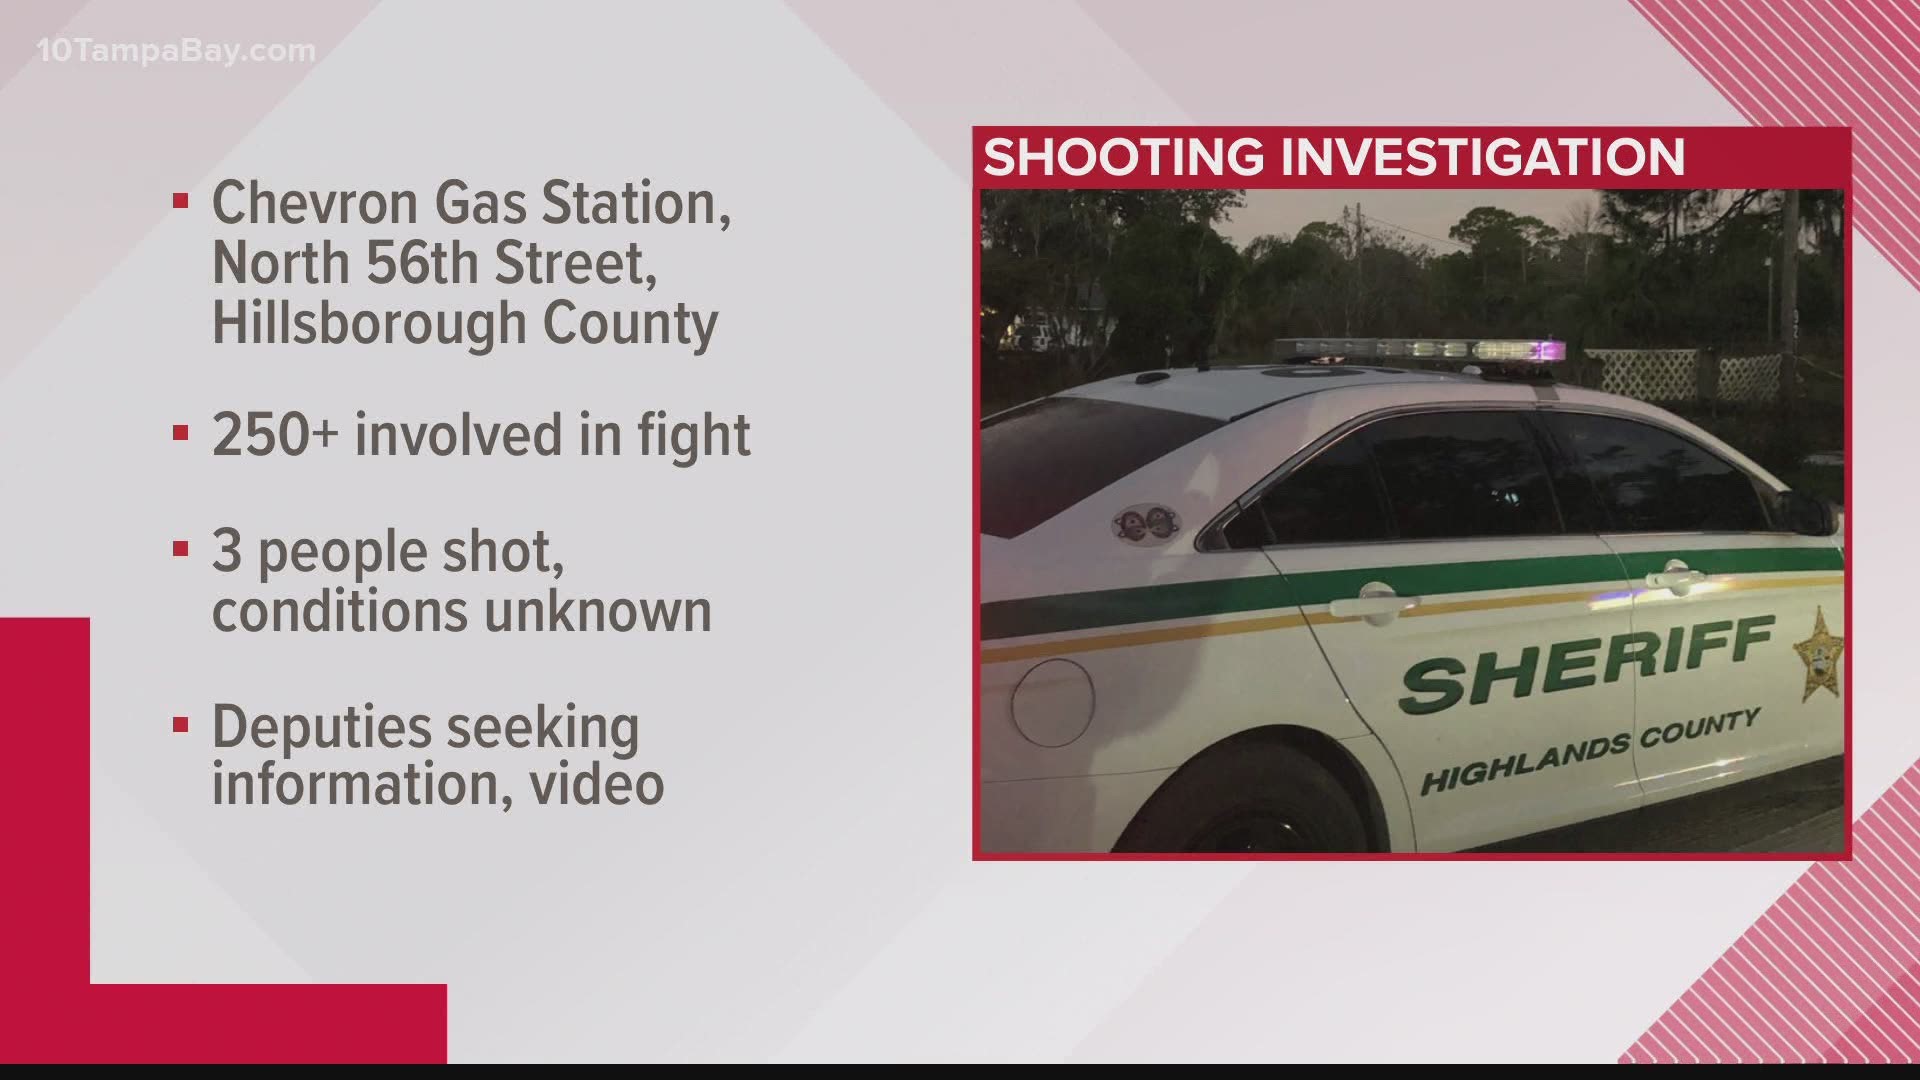 Deputies are looking for information on what led up to the shooting and the people involved.